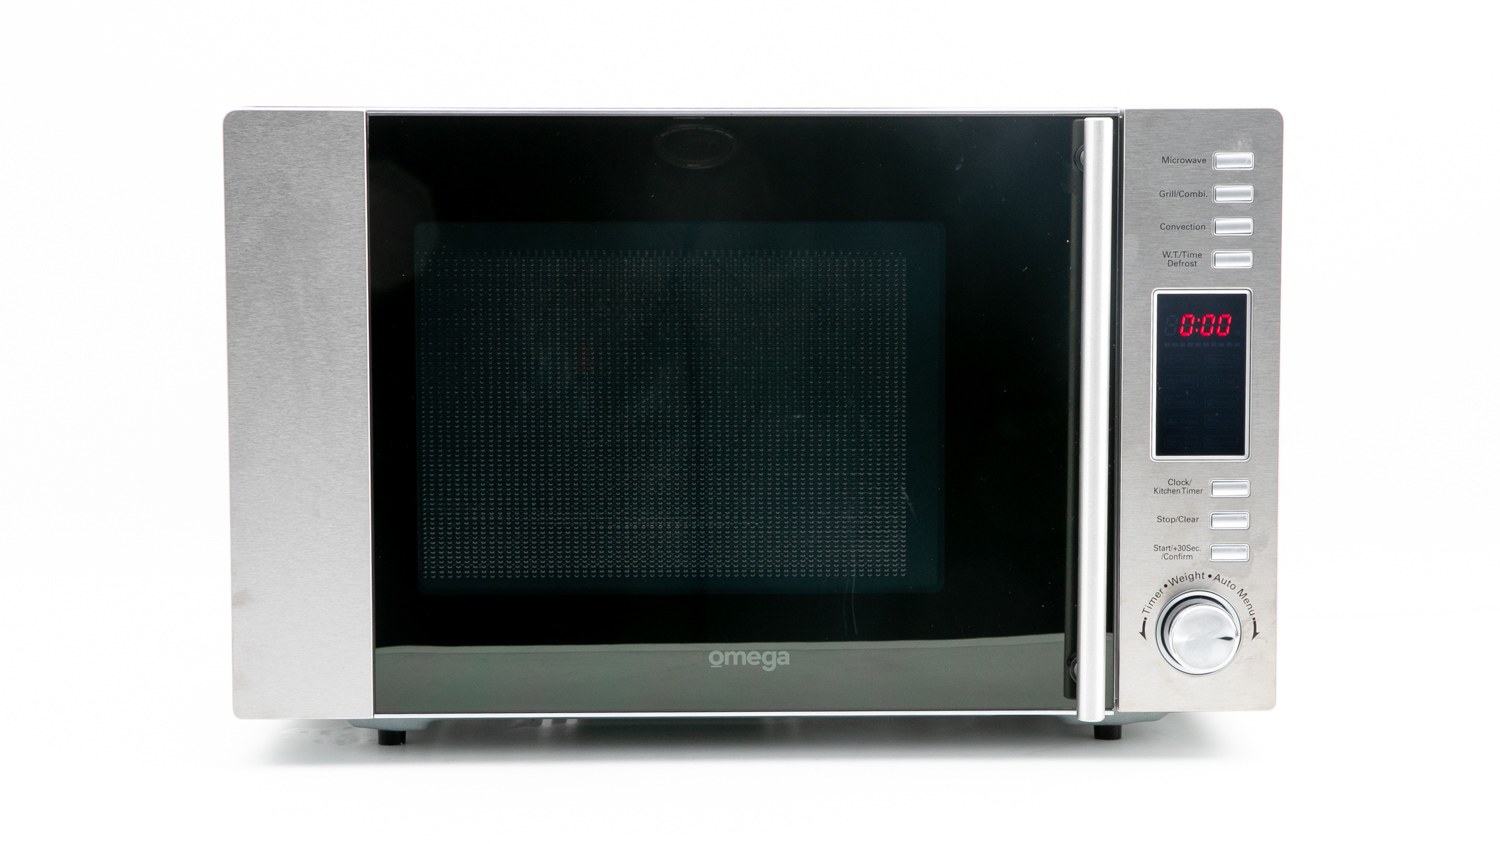 Omega OM30CX 30L Grill & Convection Microwave Oven carousel image